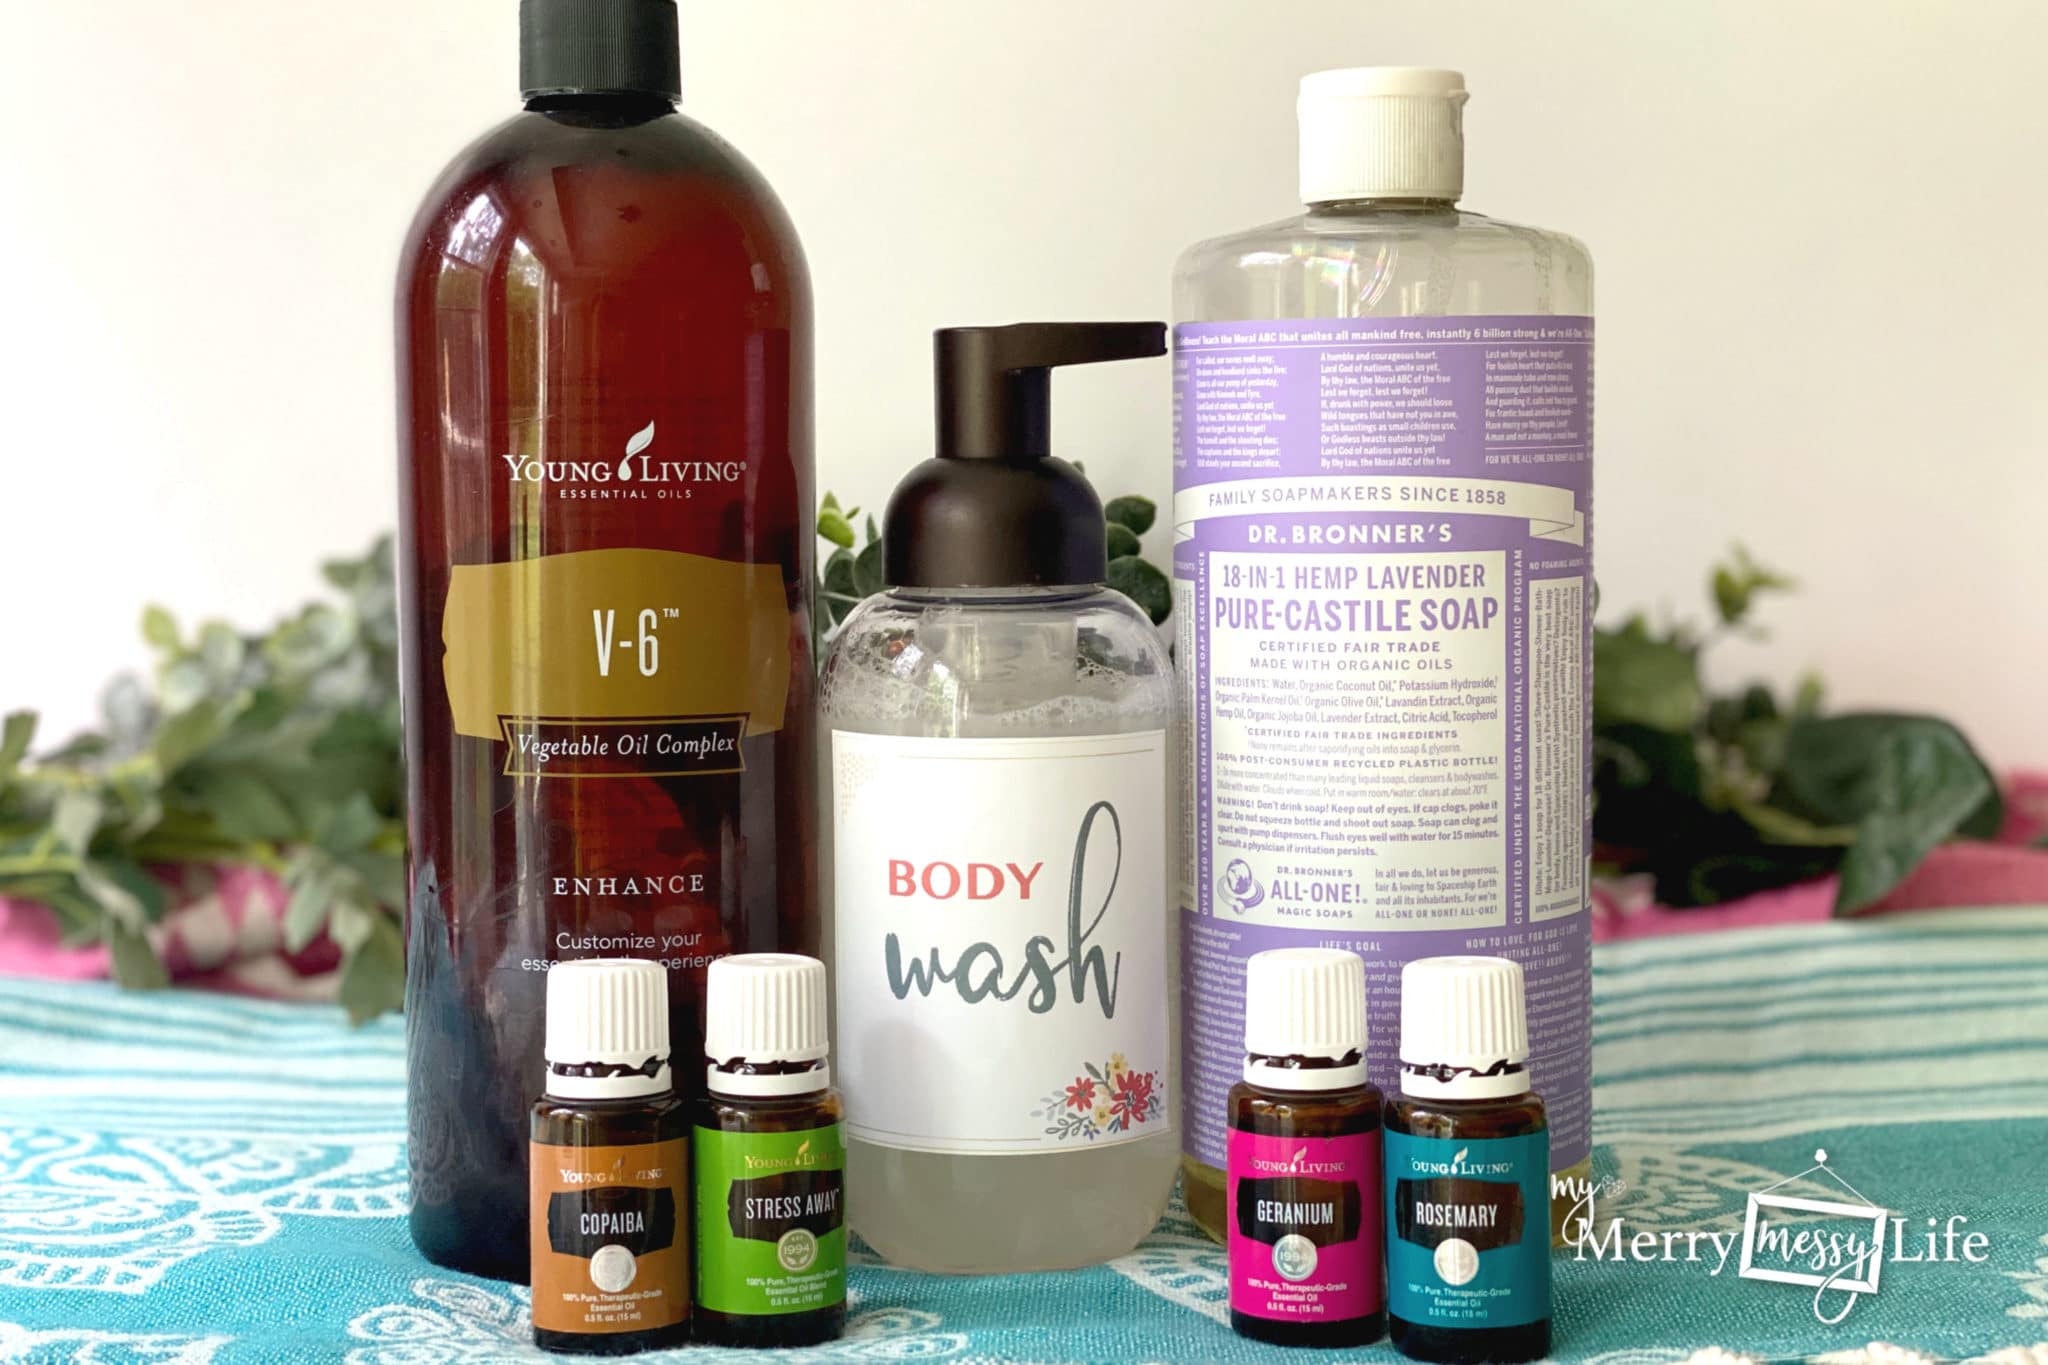 DIY Natural Foaming Body Wash Ingredients - Oil, Castile Soap, and Essential Oils